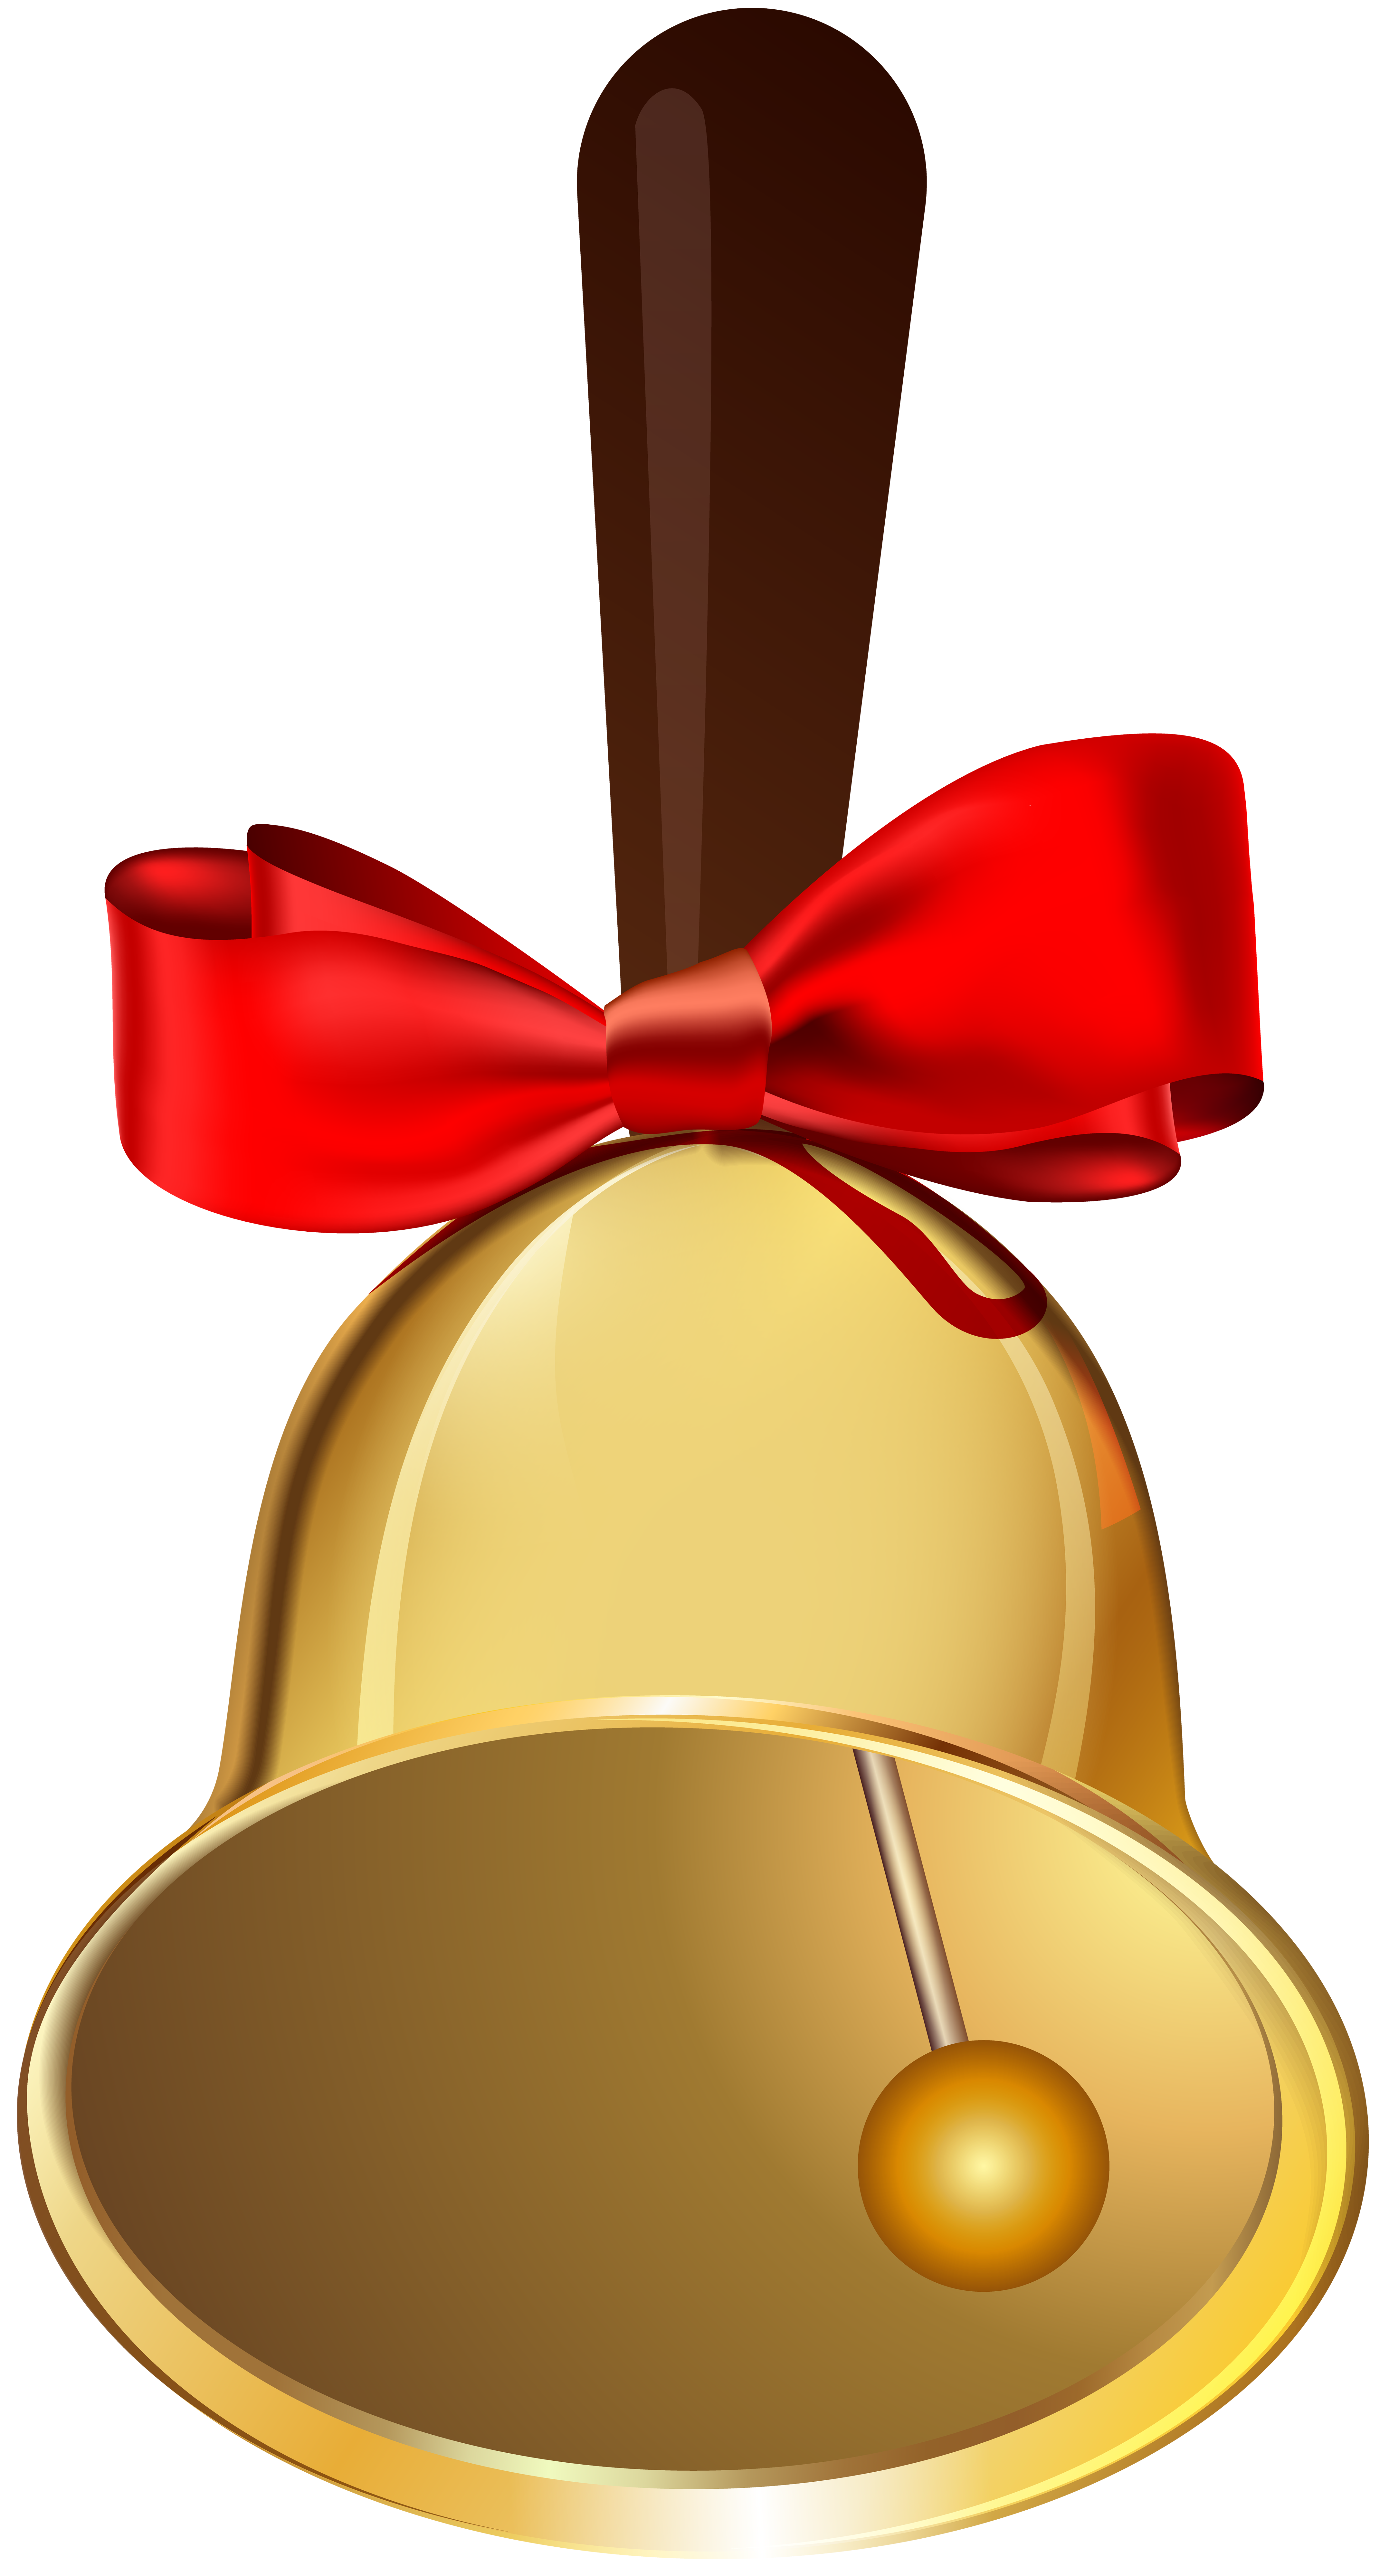 Gold Bell PNG Clip Art Image | Gallery Yopriceville - High-Quality Free ...